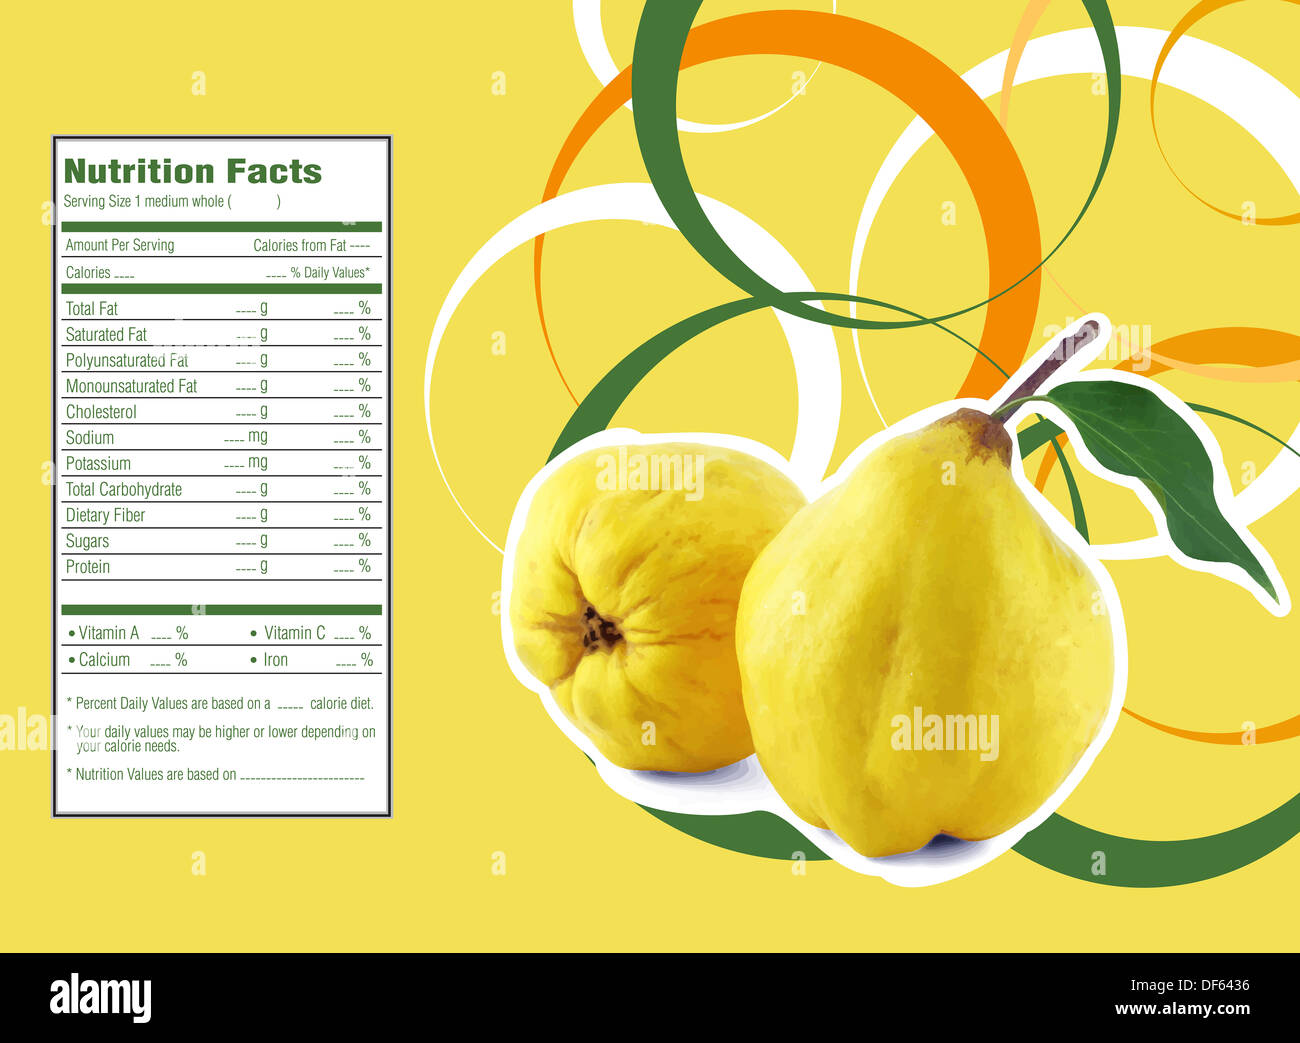 Creative Design for sweet quinces with Nutrition facts label. Stock Photo